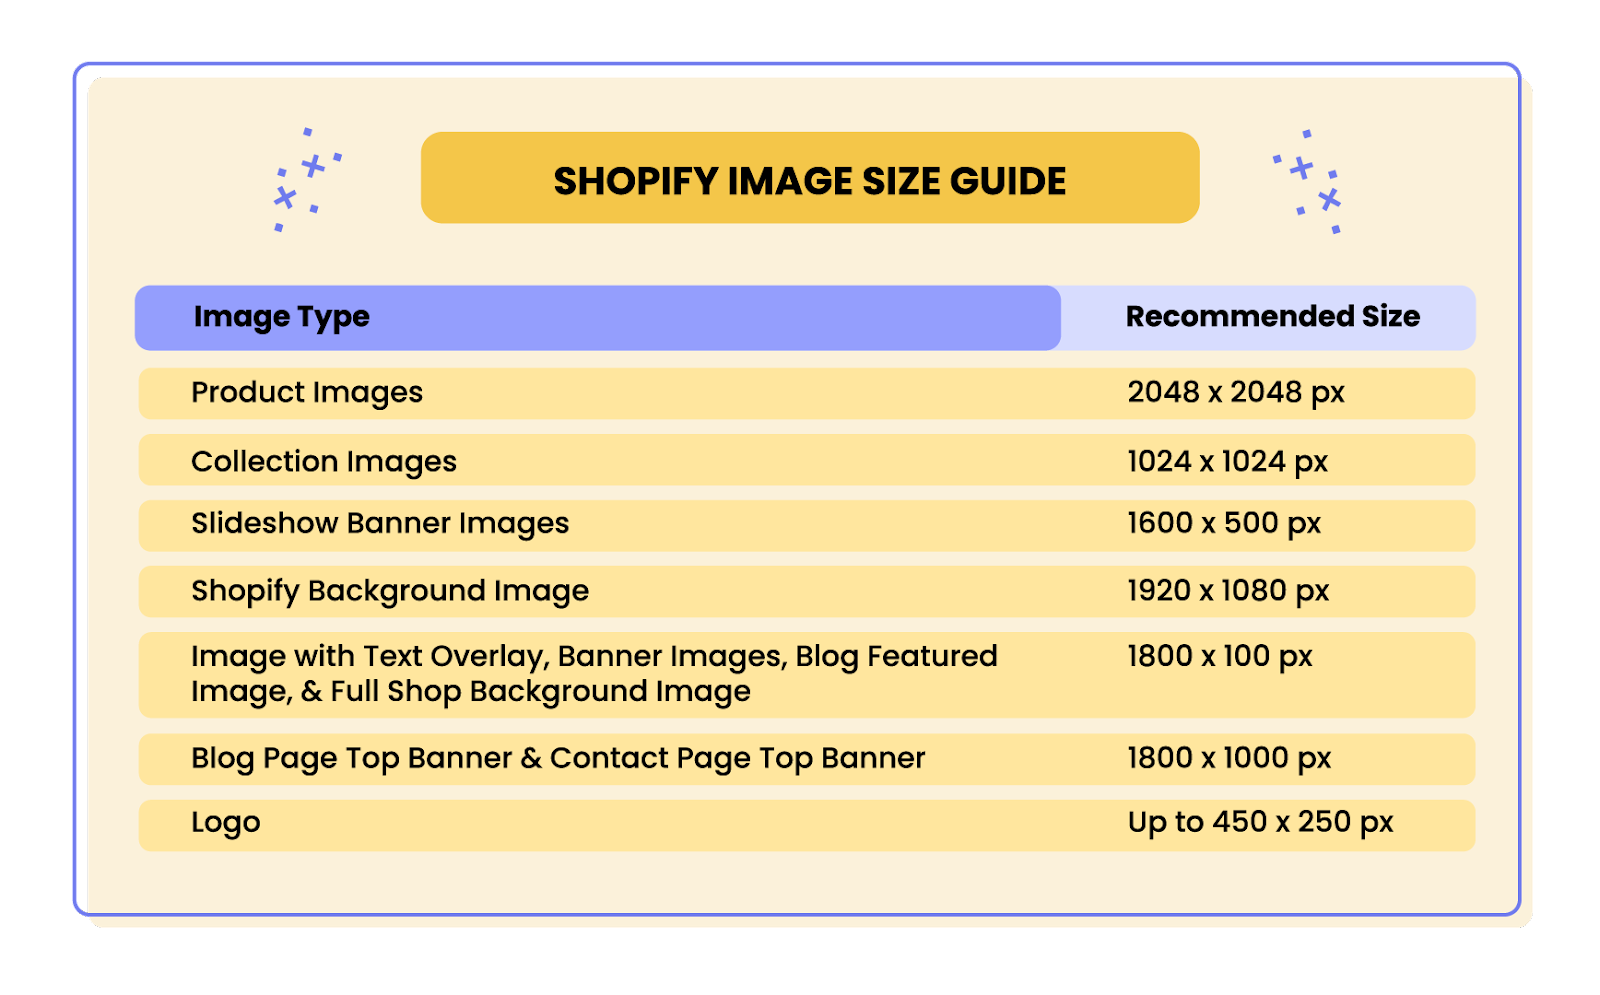 Improve Ecommerce SEO–A graphic explaining the optimal image sizes for Shopify sites. They are product images: 2048 x 2048 px, collection images: 1024 x 1024 px, slideshow banner images: 1600 x 500 px, Shopify background image: 1920 x 1080 px, image with text overlay–banner images, blog featured image, full shop background image: 1800 x 100 px, blog page top banner, contact page top banner: 1800 x 1000 px, and logo: up to 450 x 250 px.